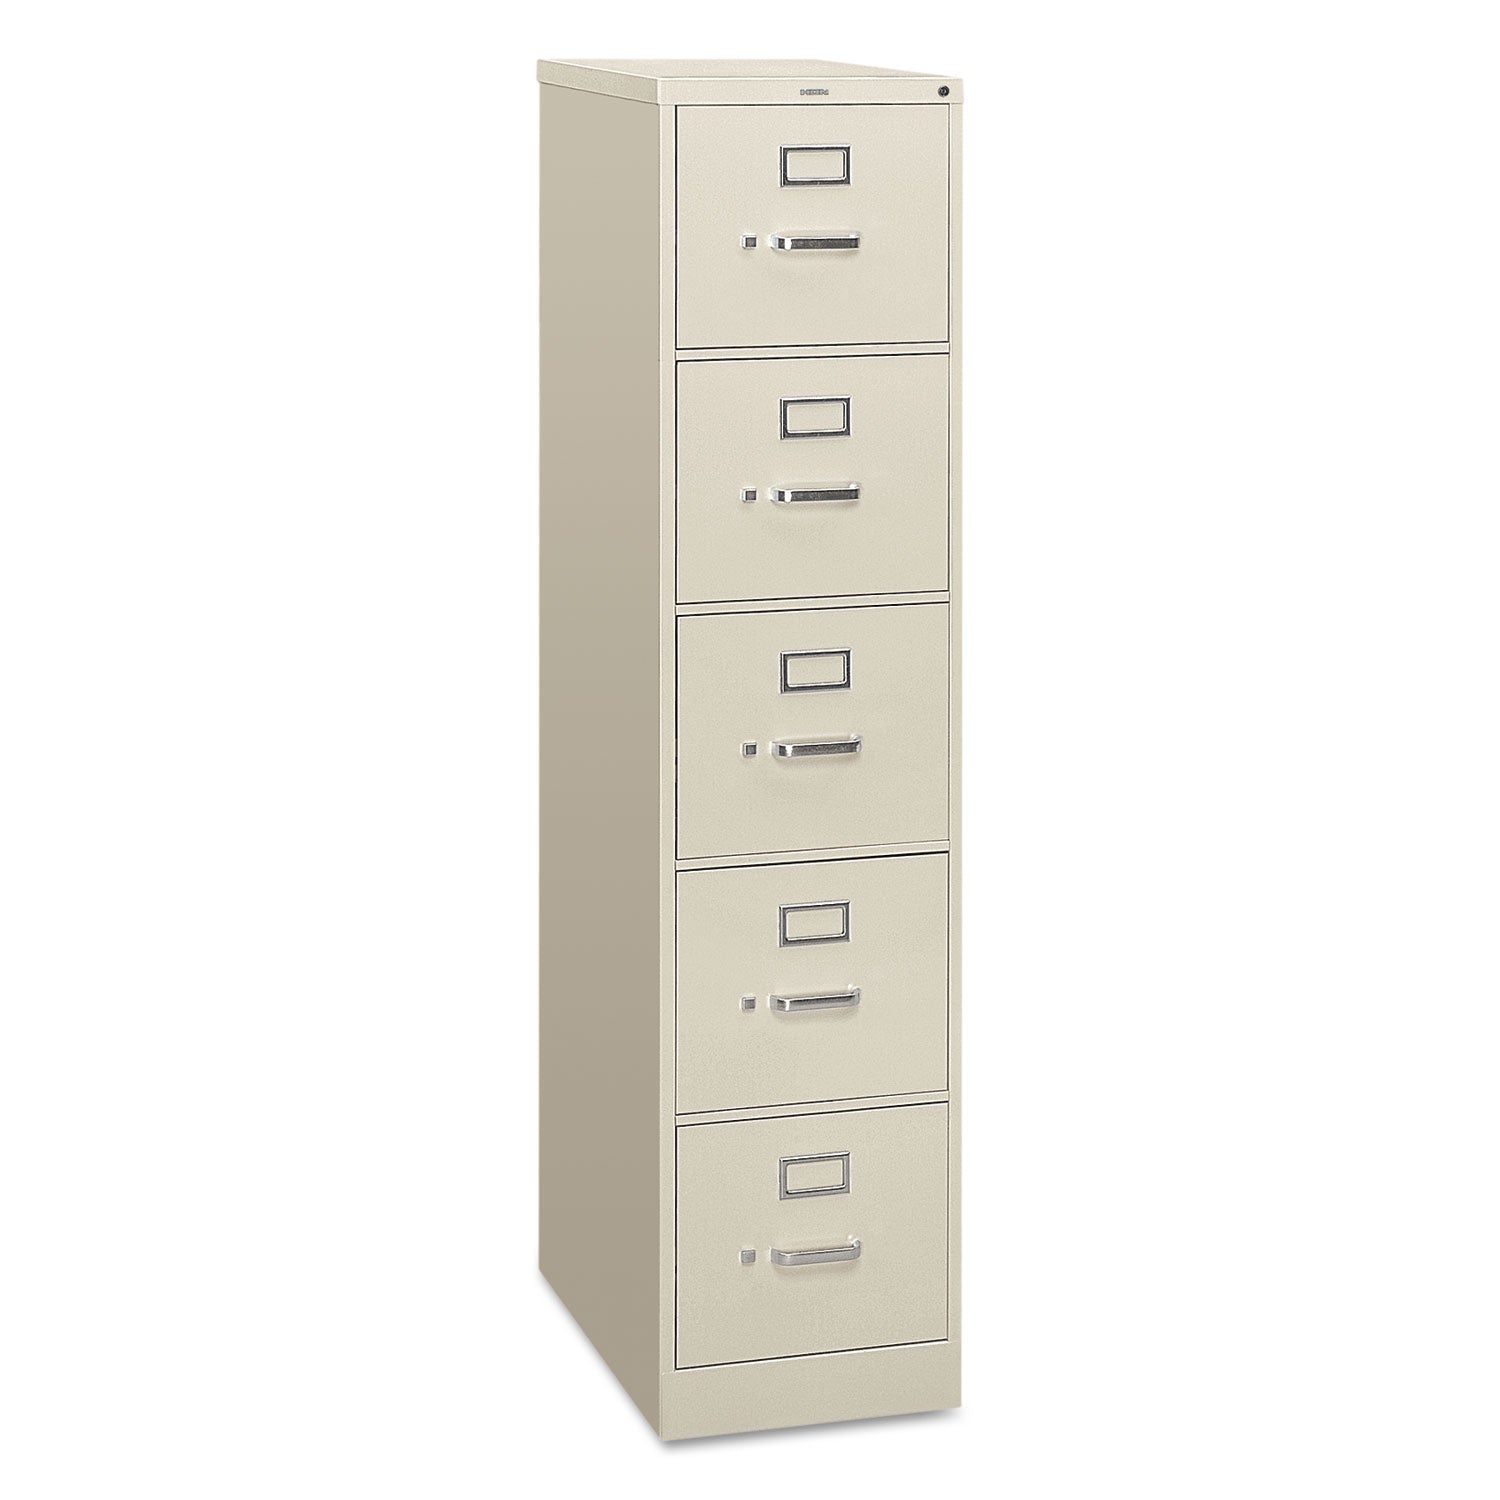 310 Series Vertical File, 5 Letter-Size File Drawers, Light Gray, 15" x 26.5" x 60 - 